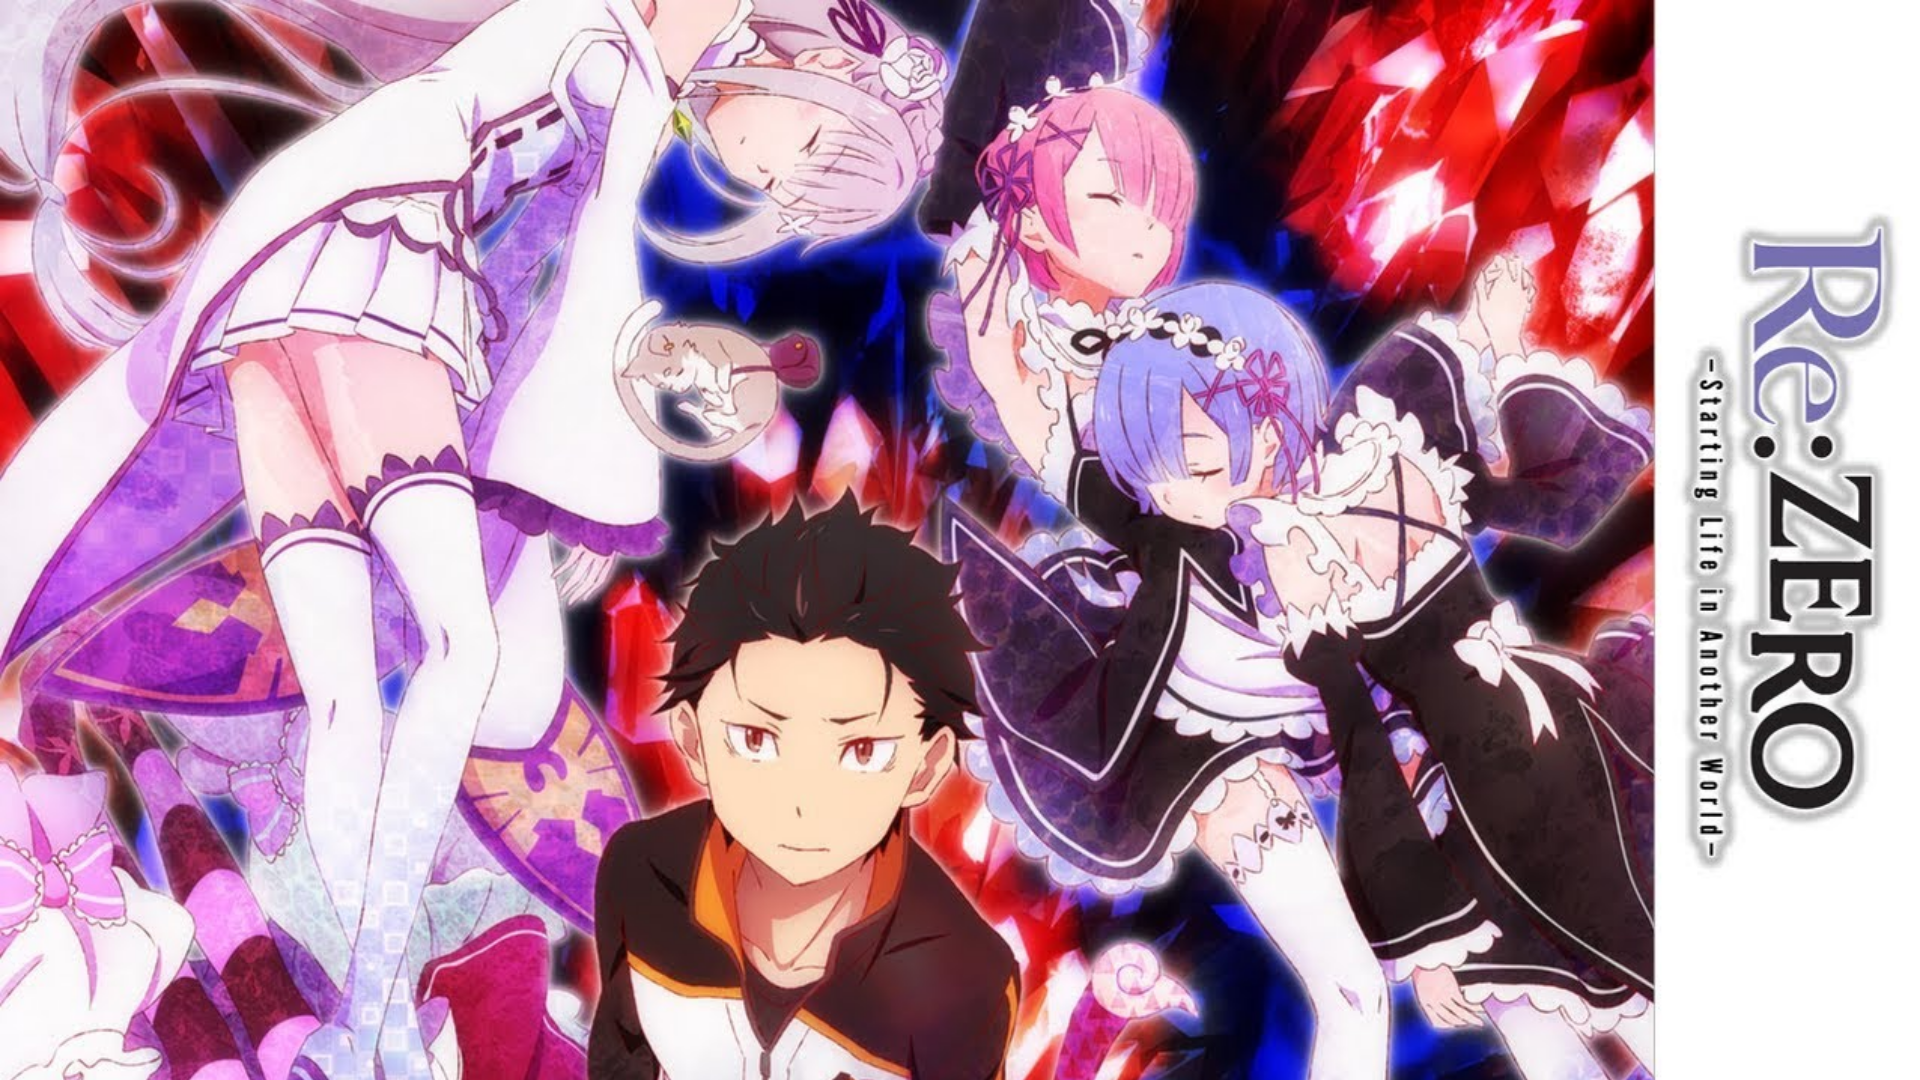 Re:ZERO: Starting Life in Another World